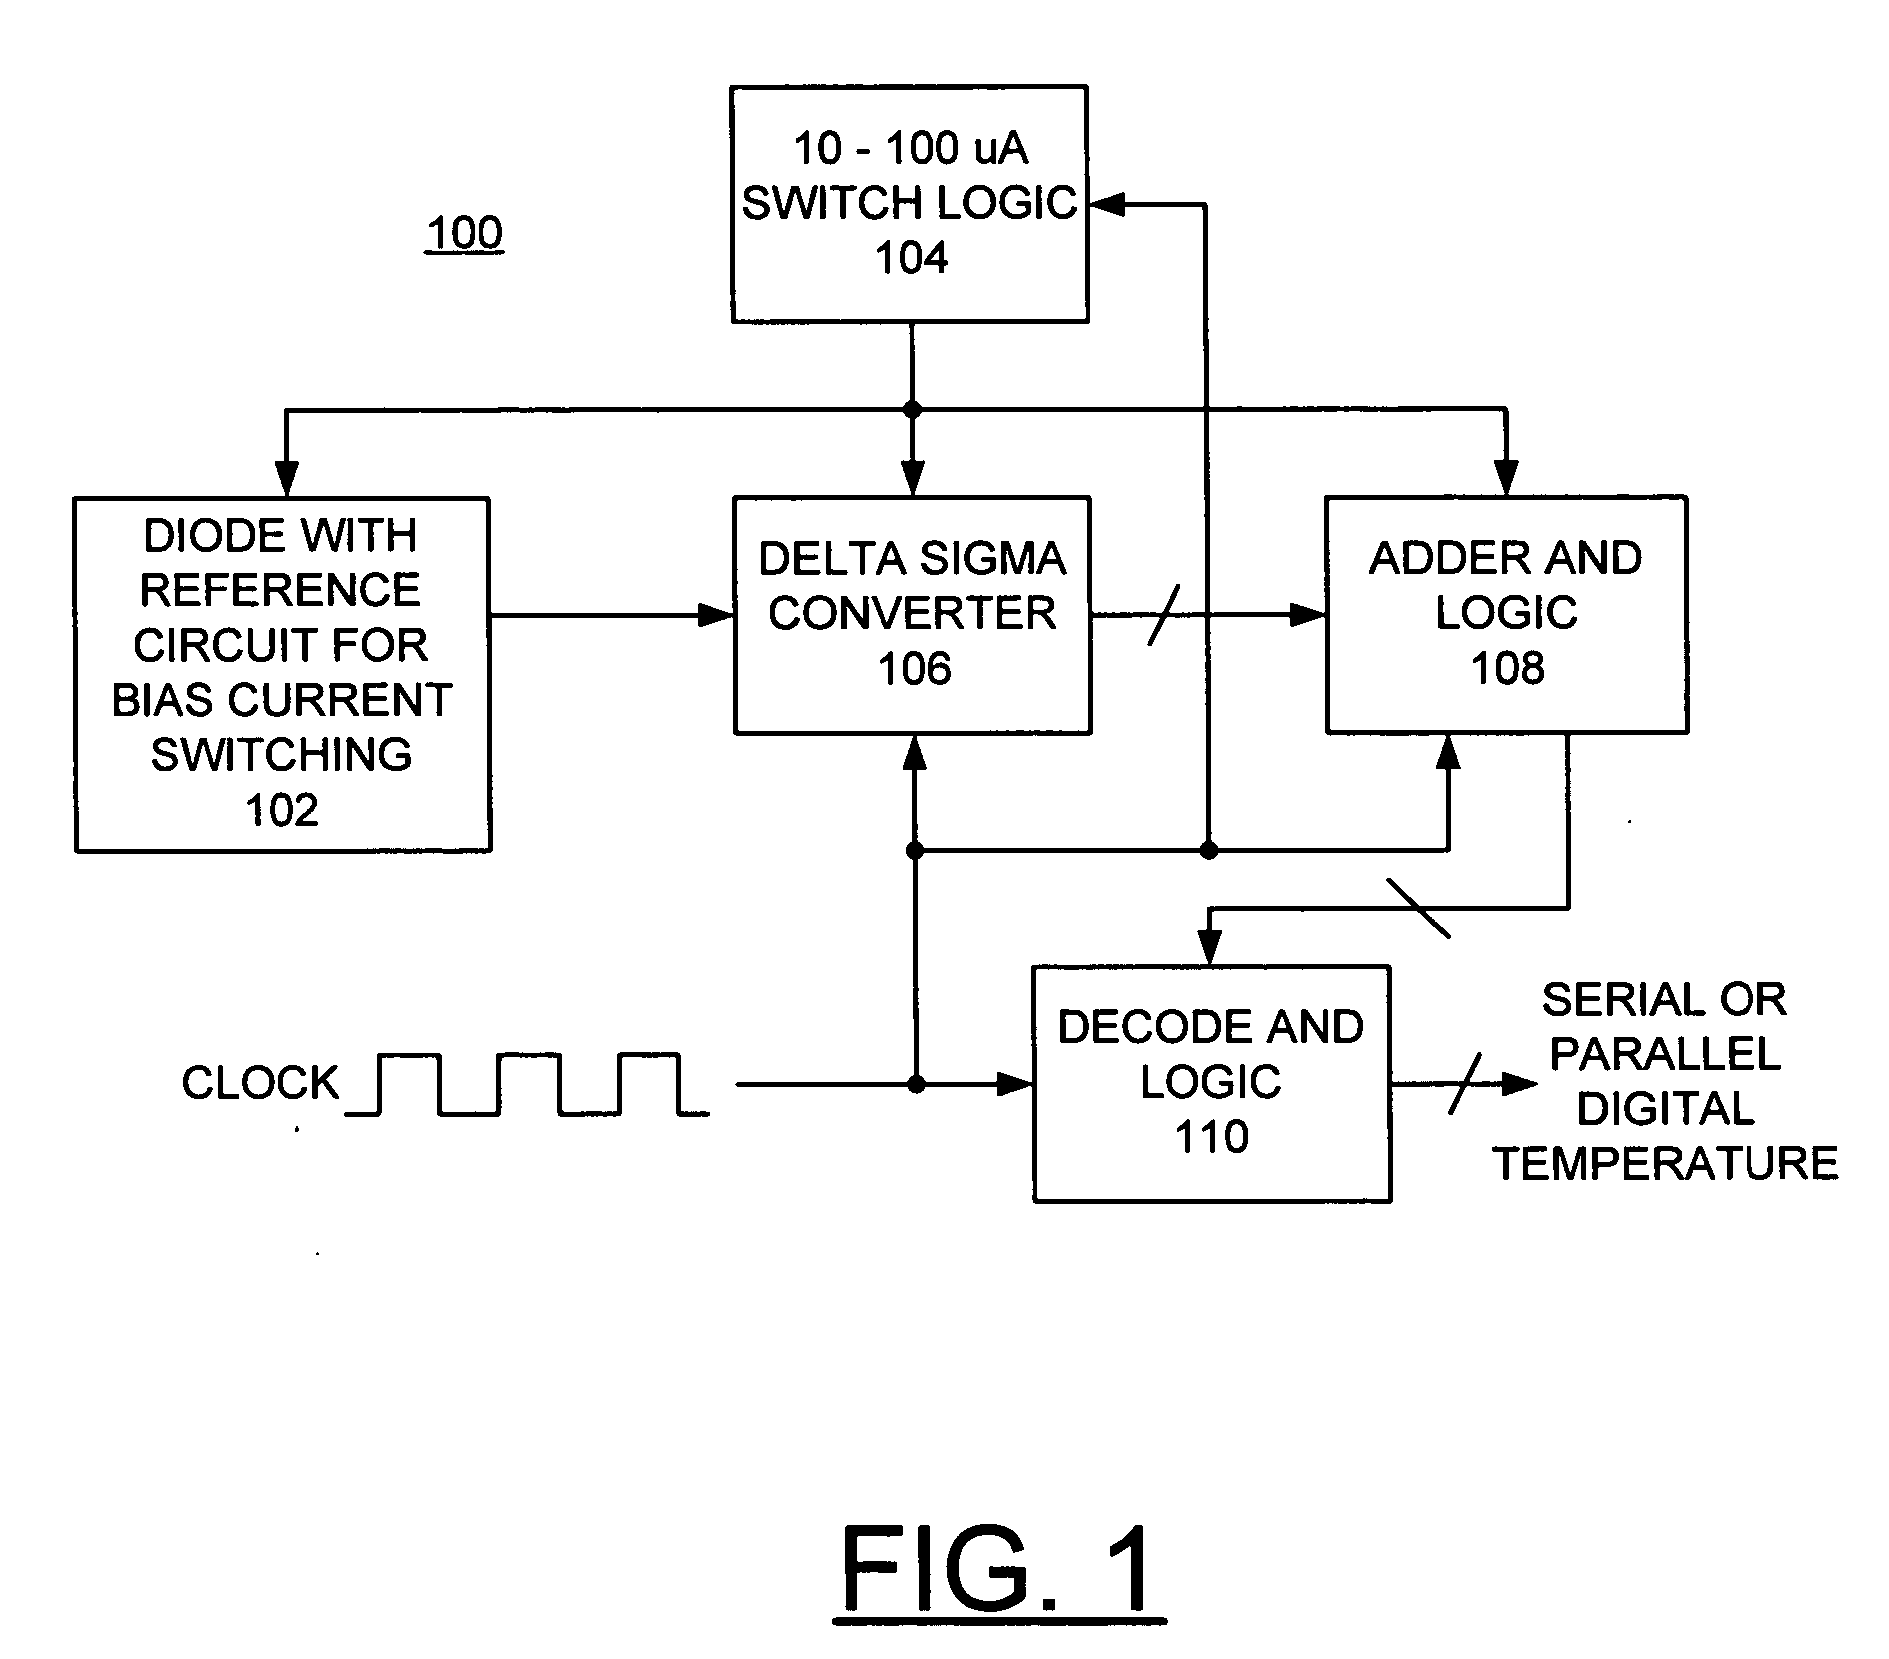 Method and reference circuit for bias current switching for implementing an integrated temperature sensor